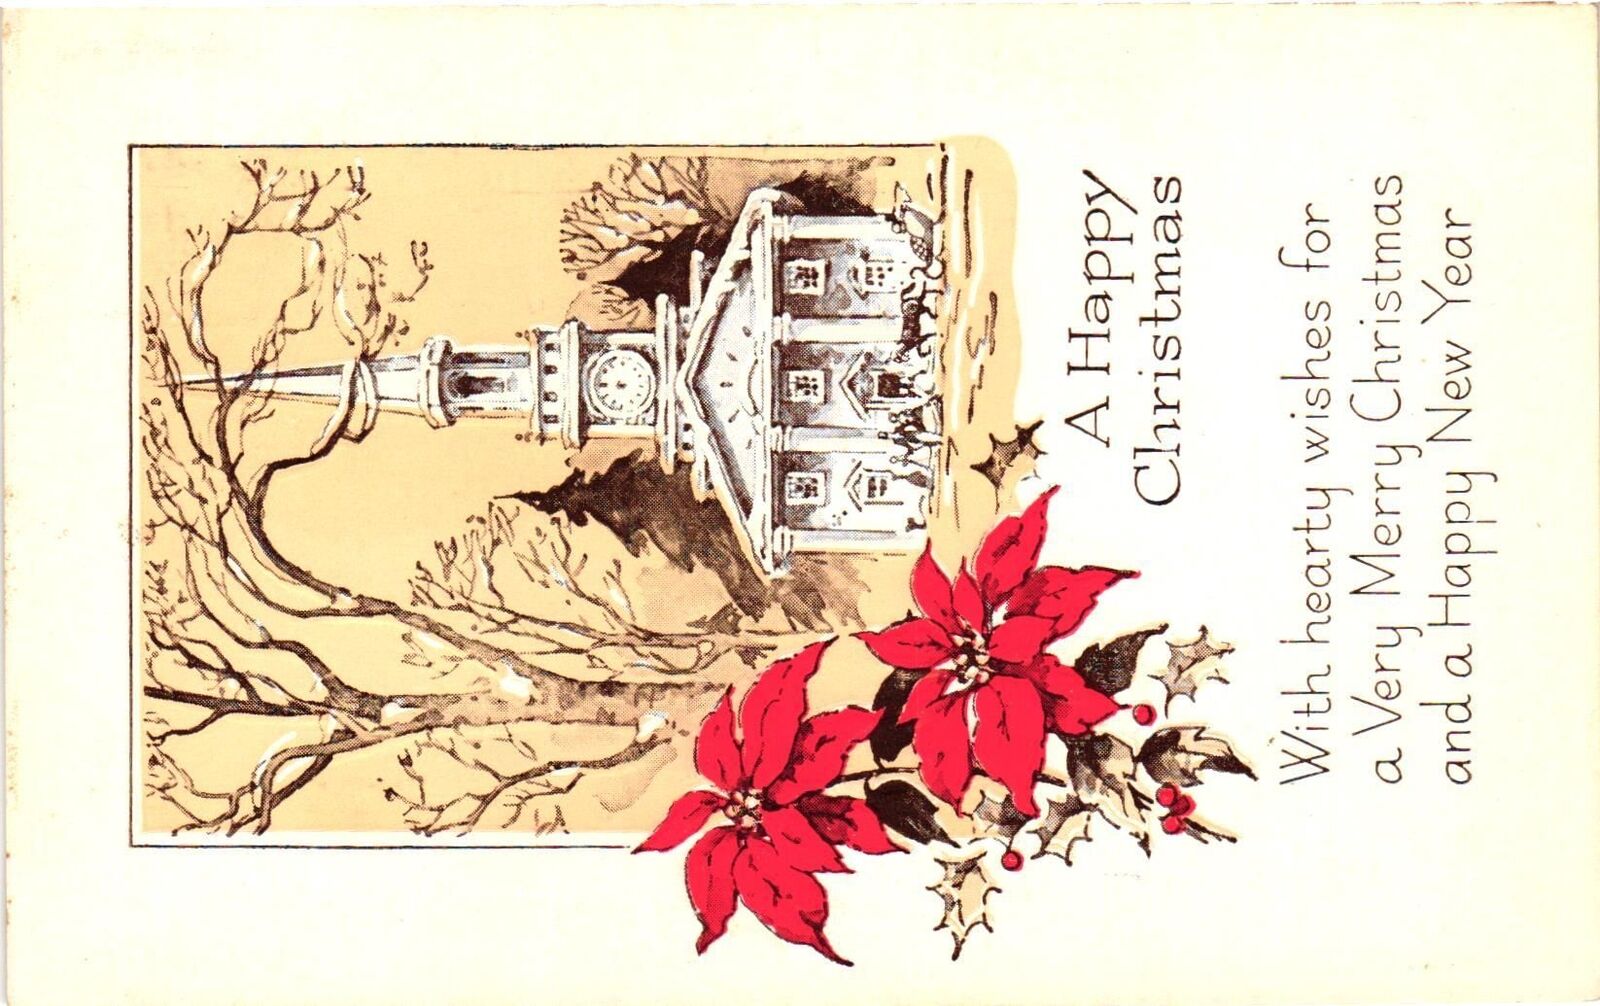 Vintage Postcard- A HAPPY CHRISTMAS, WITH HEARTY WISHES FOR A VERY MERRY CHRISTM